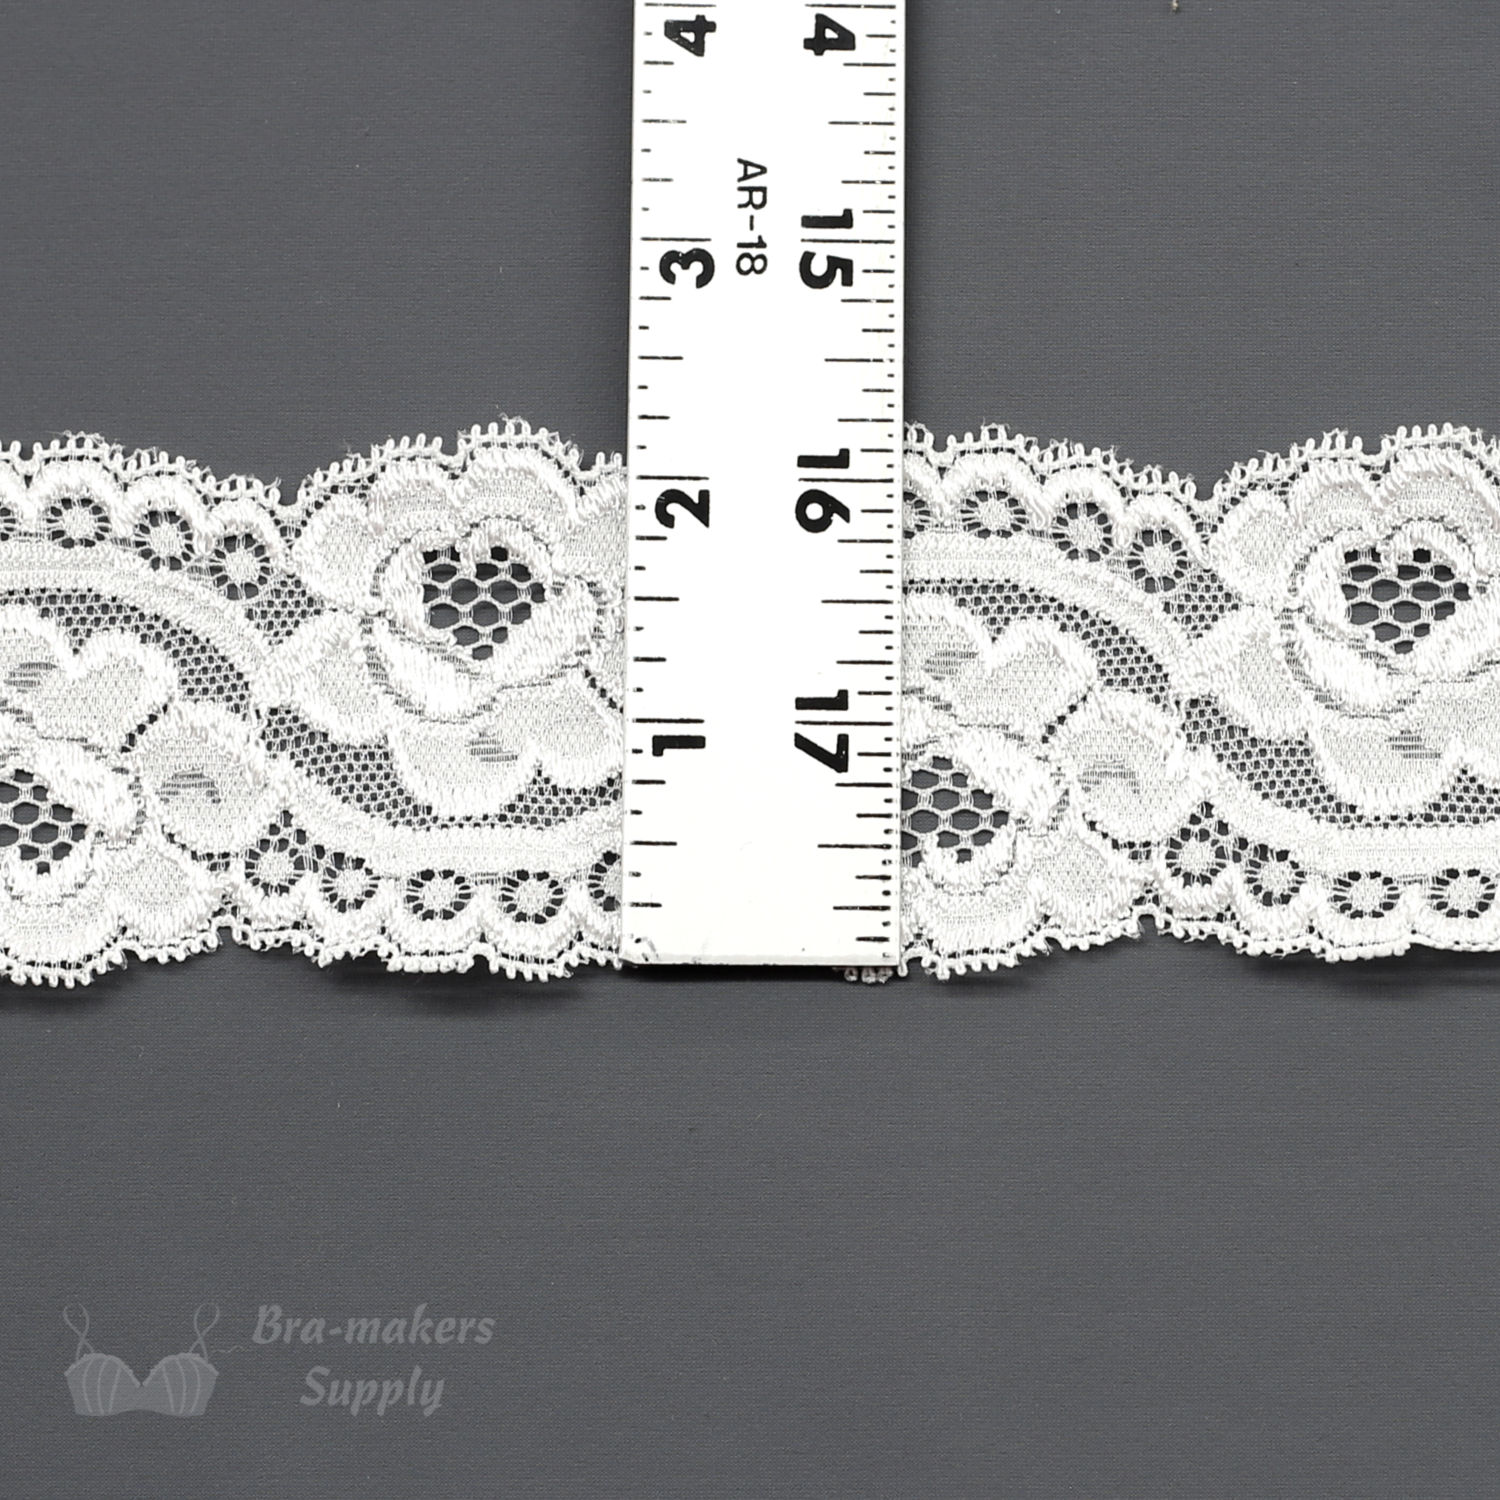 Two Inch Off-White Floral Galloon Stretch Lace - Bra-Makers Supply